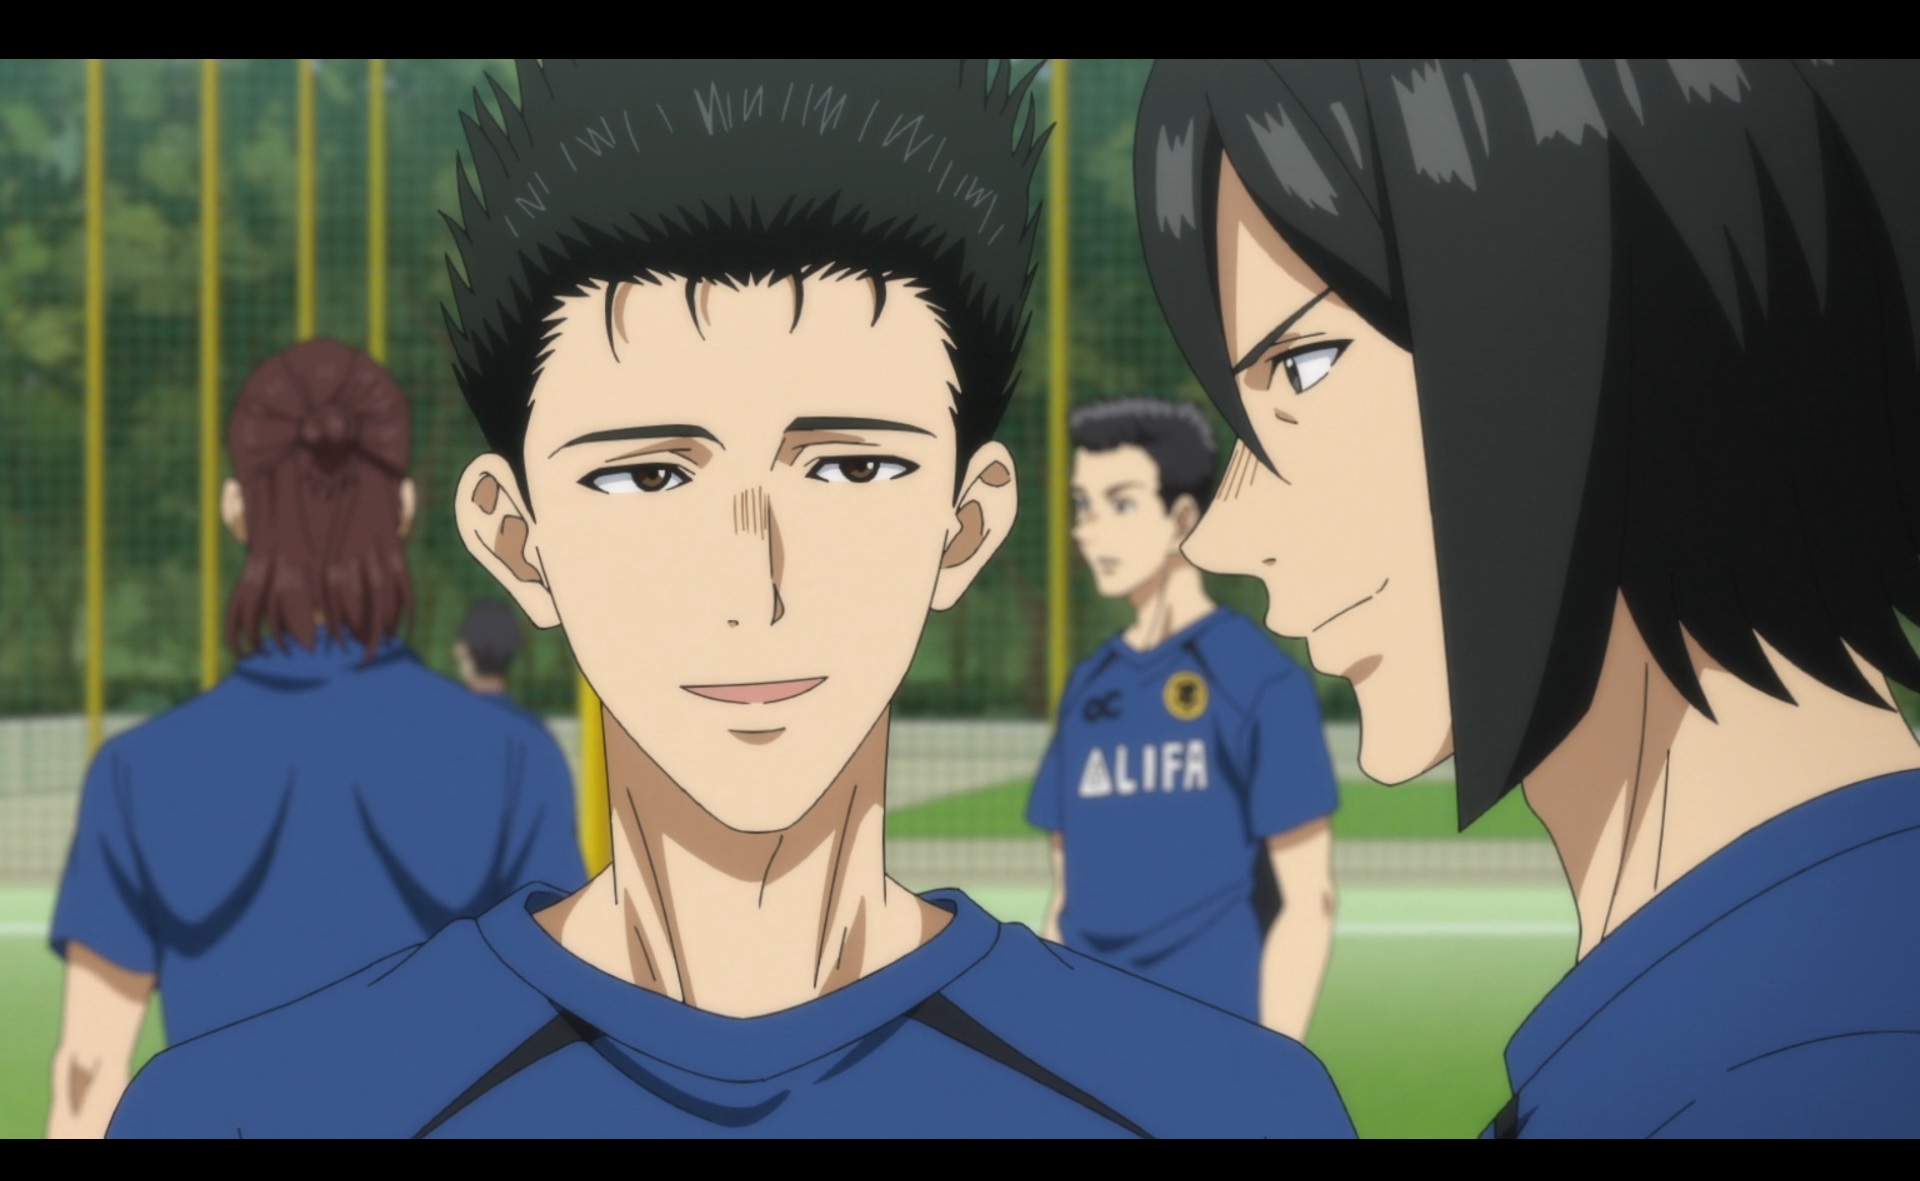 Haruhisa Kuribayashi chats with a fellow soccer player during a practice training session in a scene from the Aoashi TV anime.